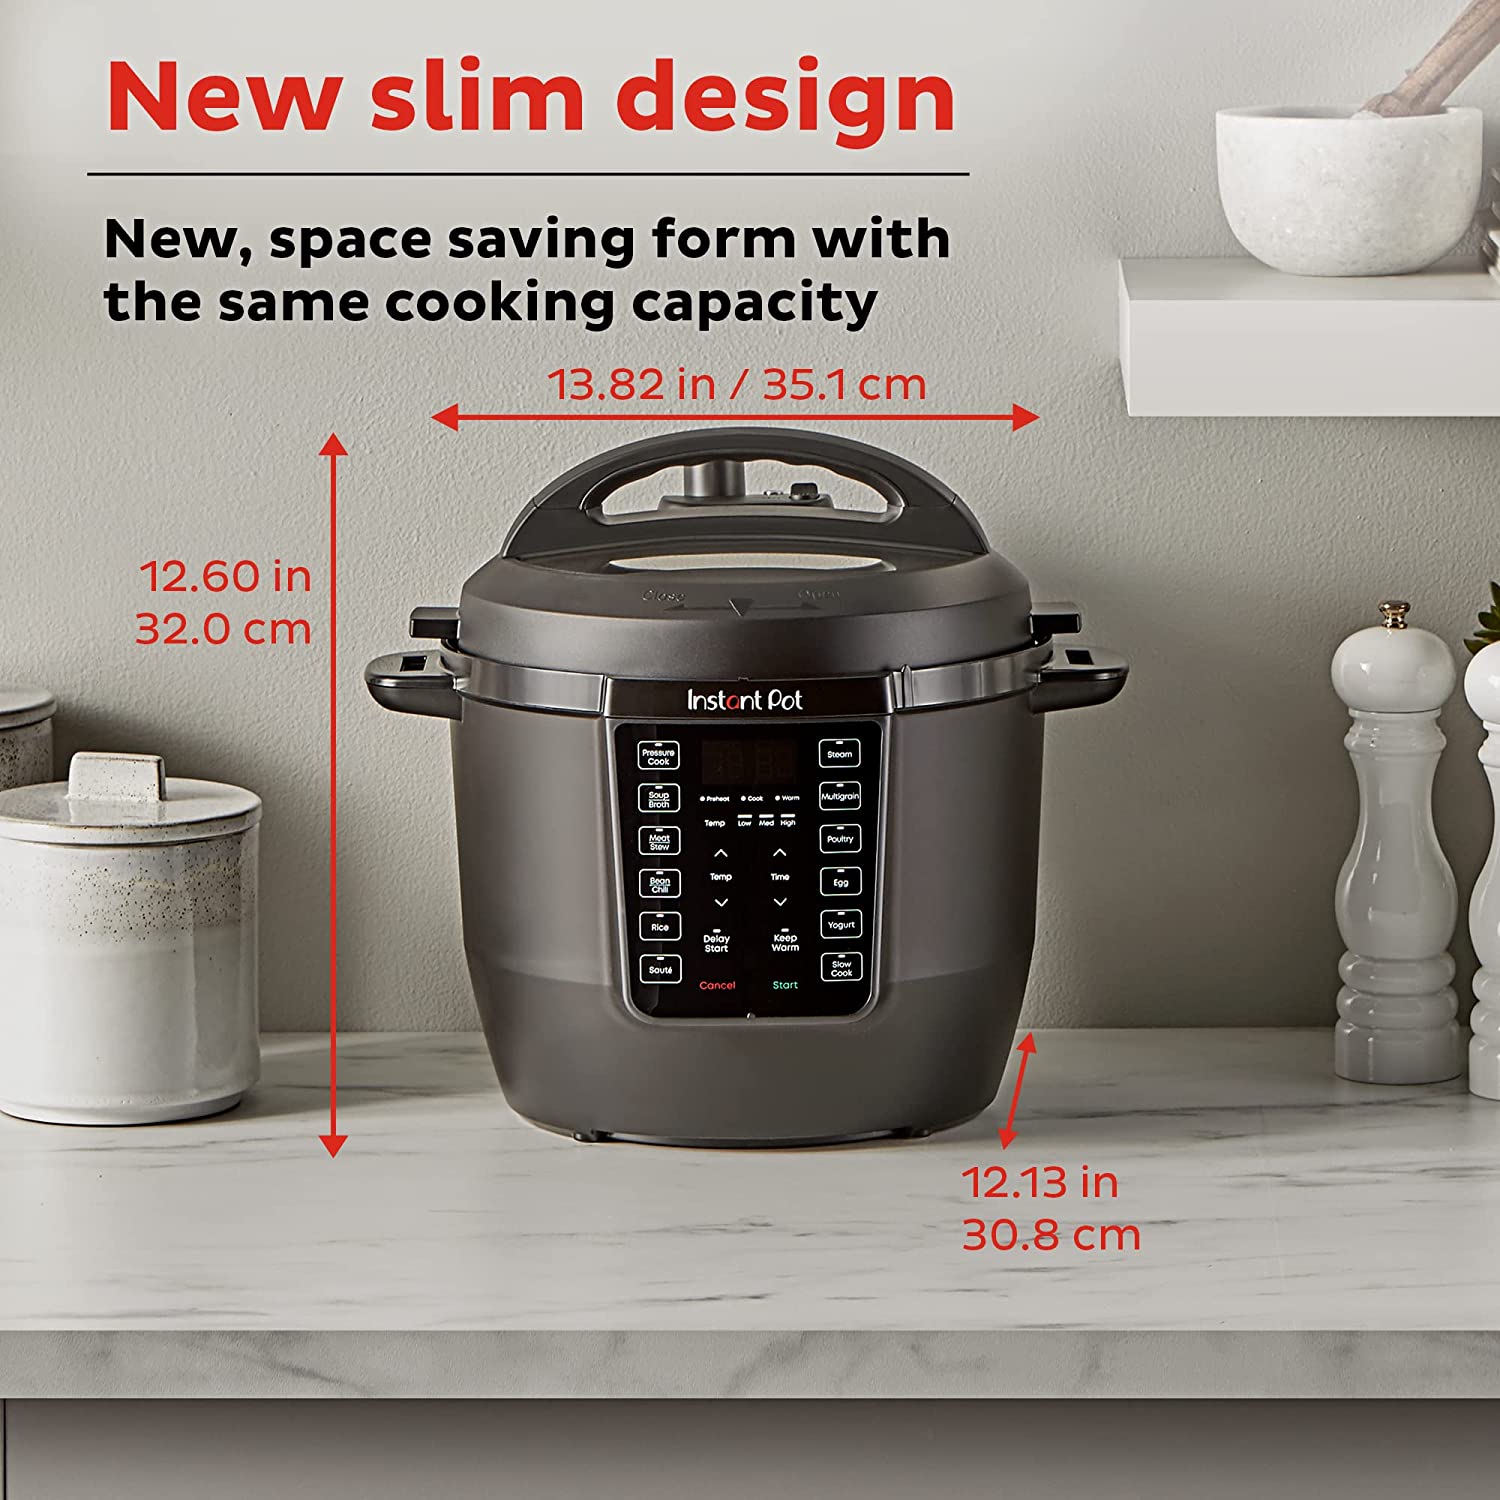  Instant Pot RIO, 7-in-1 Electric Multi-Cooker, Pressure Cooker,  Slow Cooker, Rice Cooker, Steamer, Sauté, Yogurt Maker, & Warmer, Includes  App With Over 800 Recipes, 6 Quart: Home & Kitchen